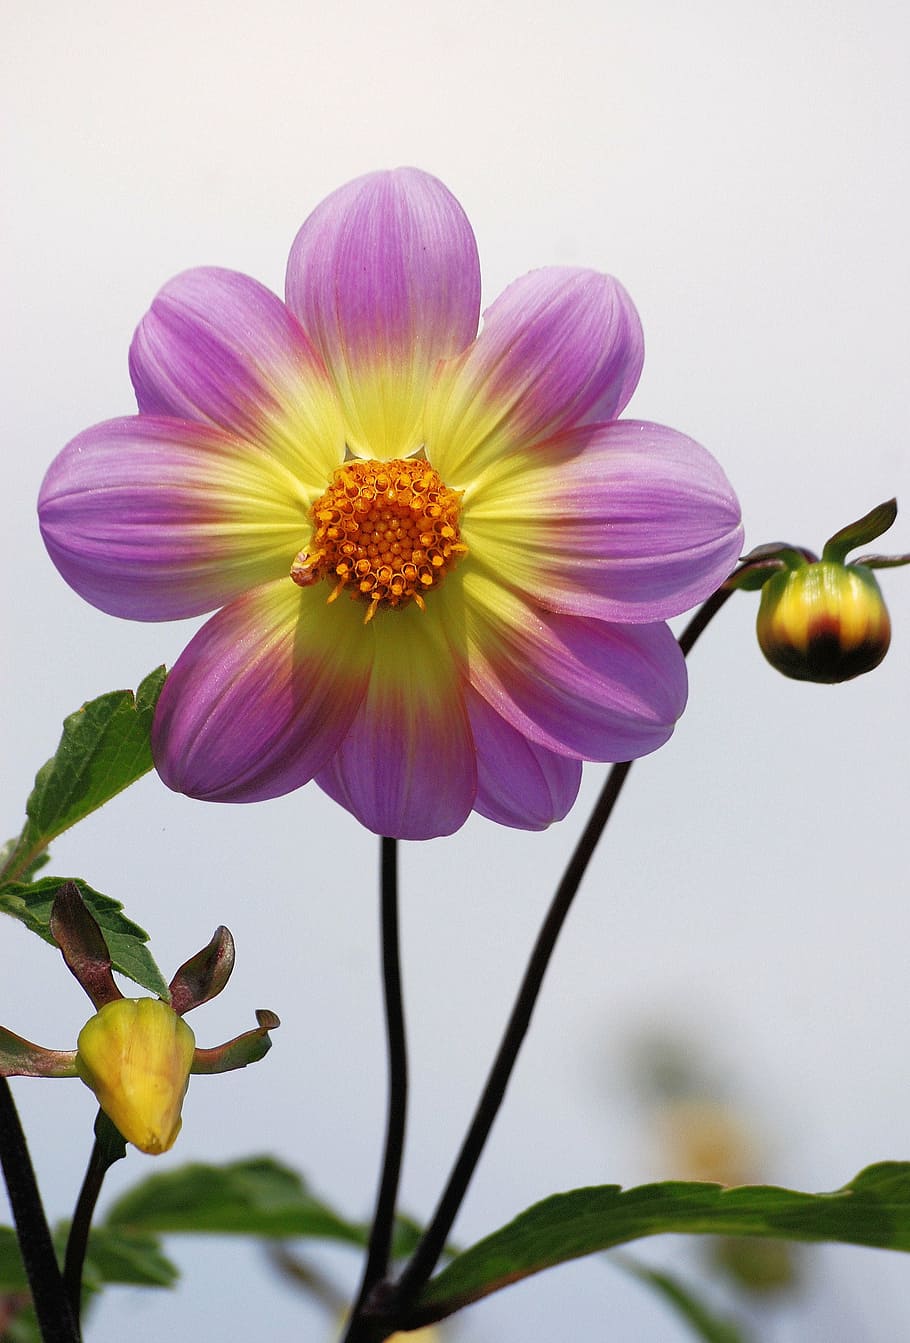 purple-and-yellow petaled flowers, dahlia, flower, garden, colorful, large flowers, purple, yellow, nature, plant